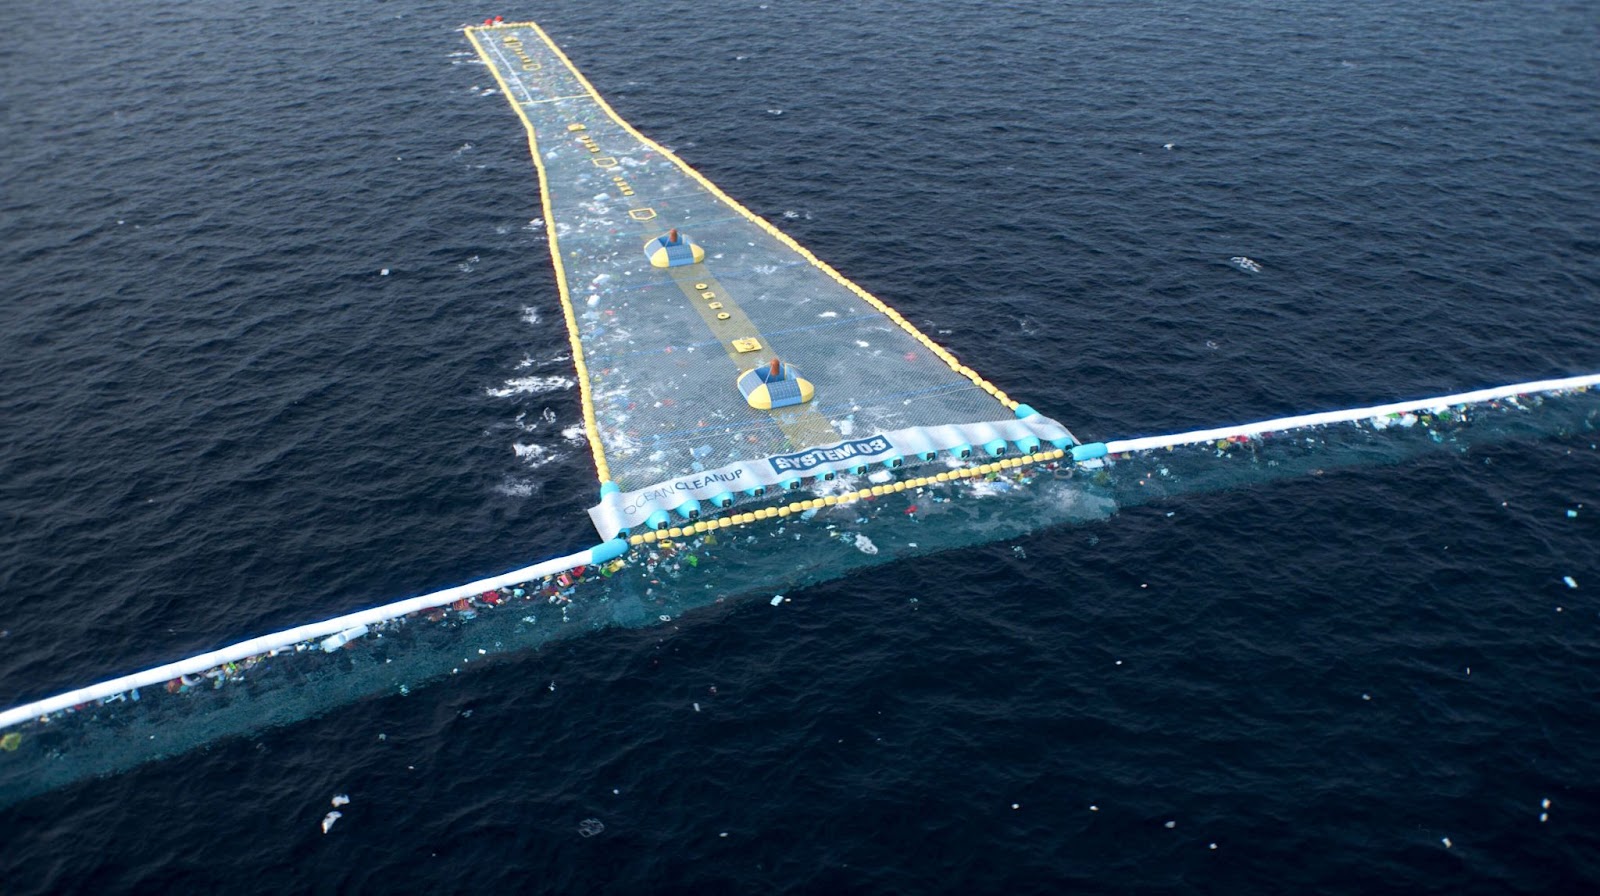 Transition to Systems 03 begins for the Ocean Cleanup Group